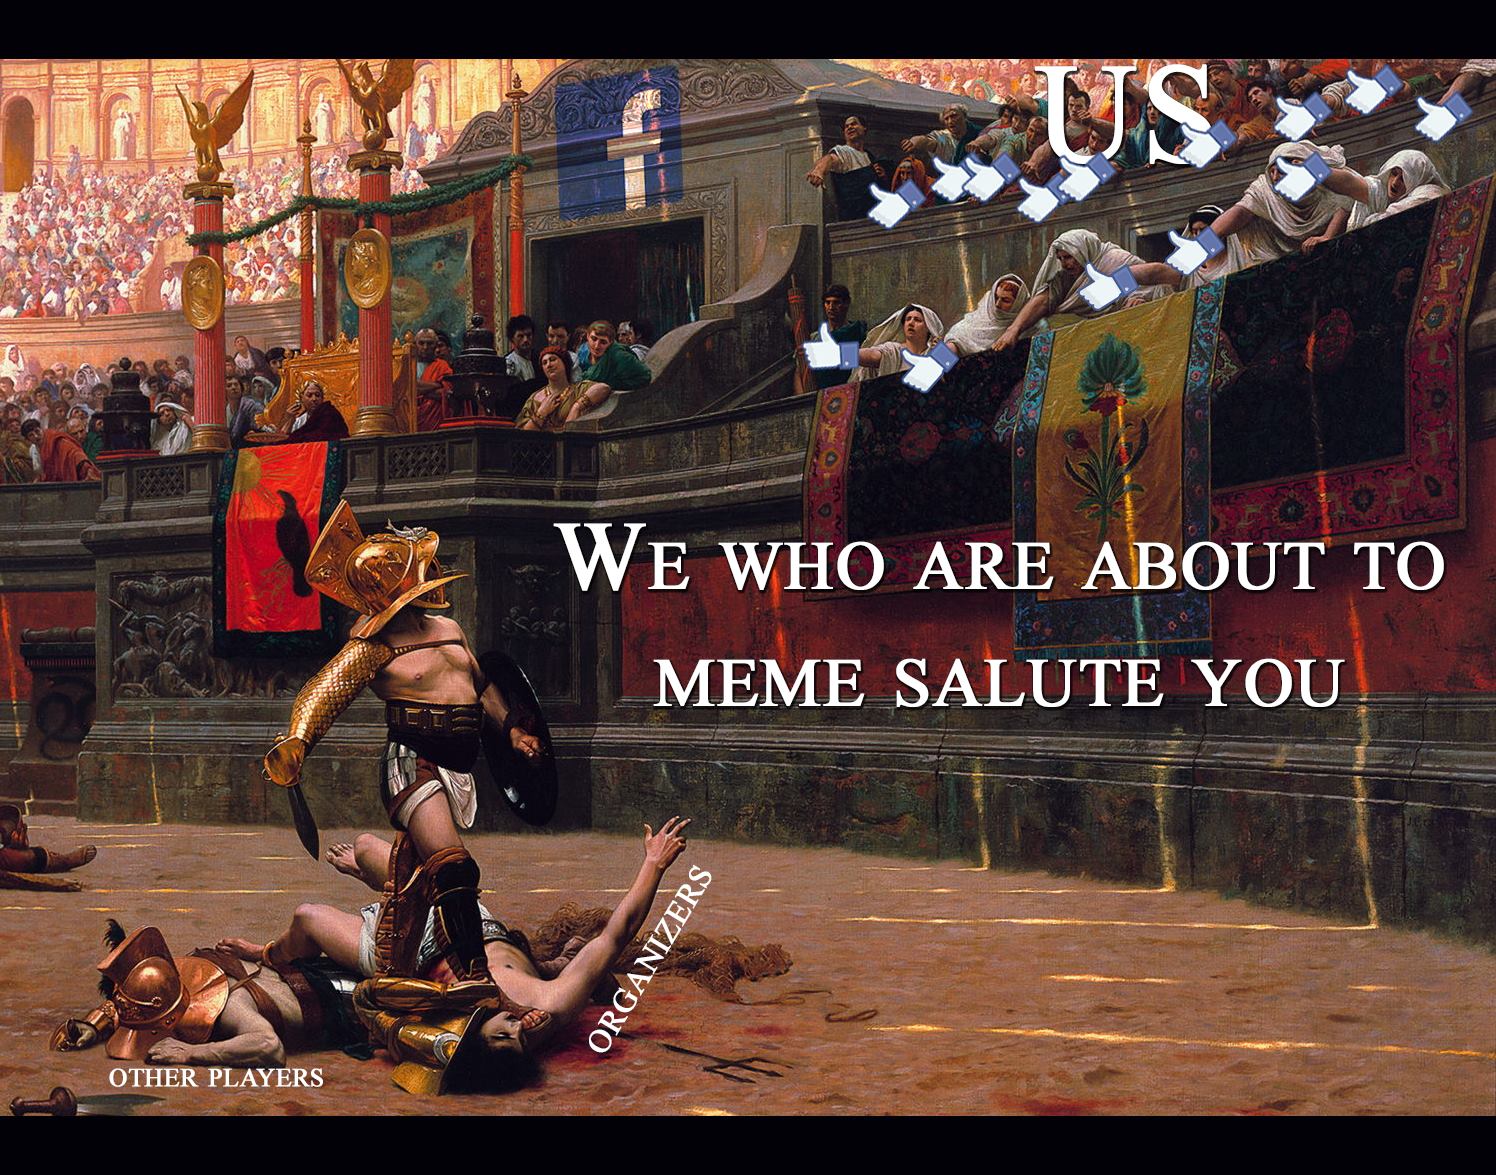 We who are about to meme salute you: Thoughts on That Larp Meme Page